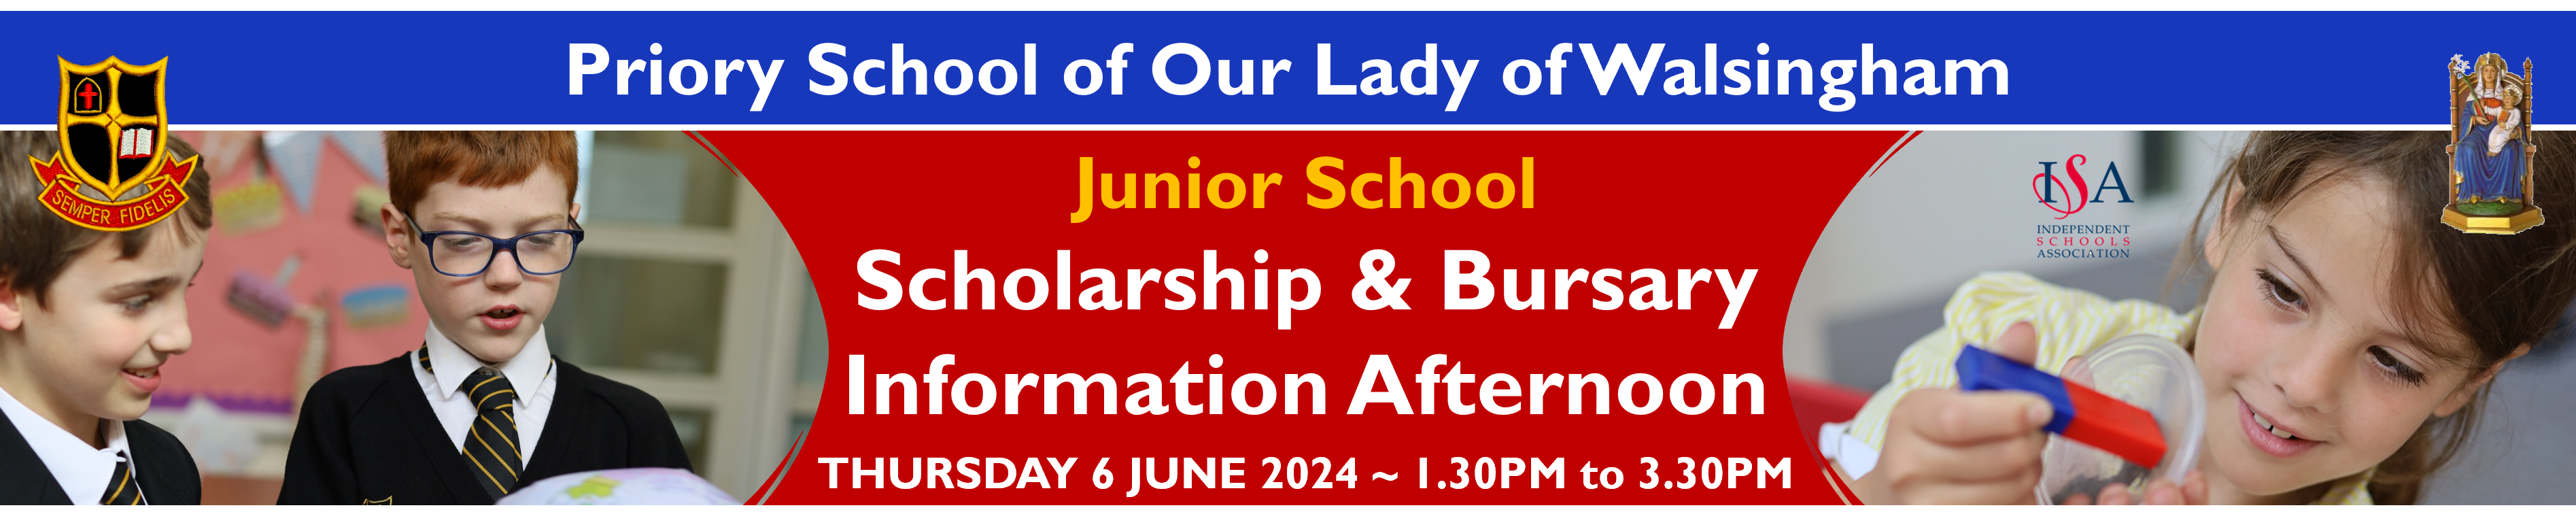  Scholarship Afternoon, 6 June 2024